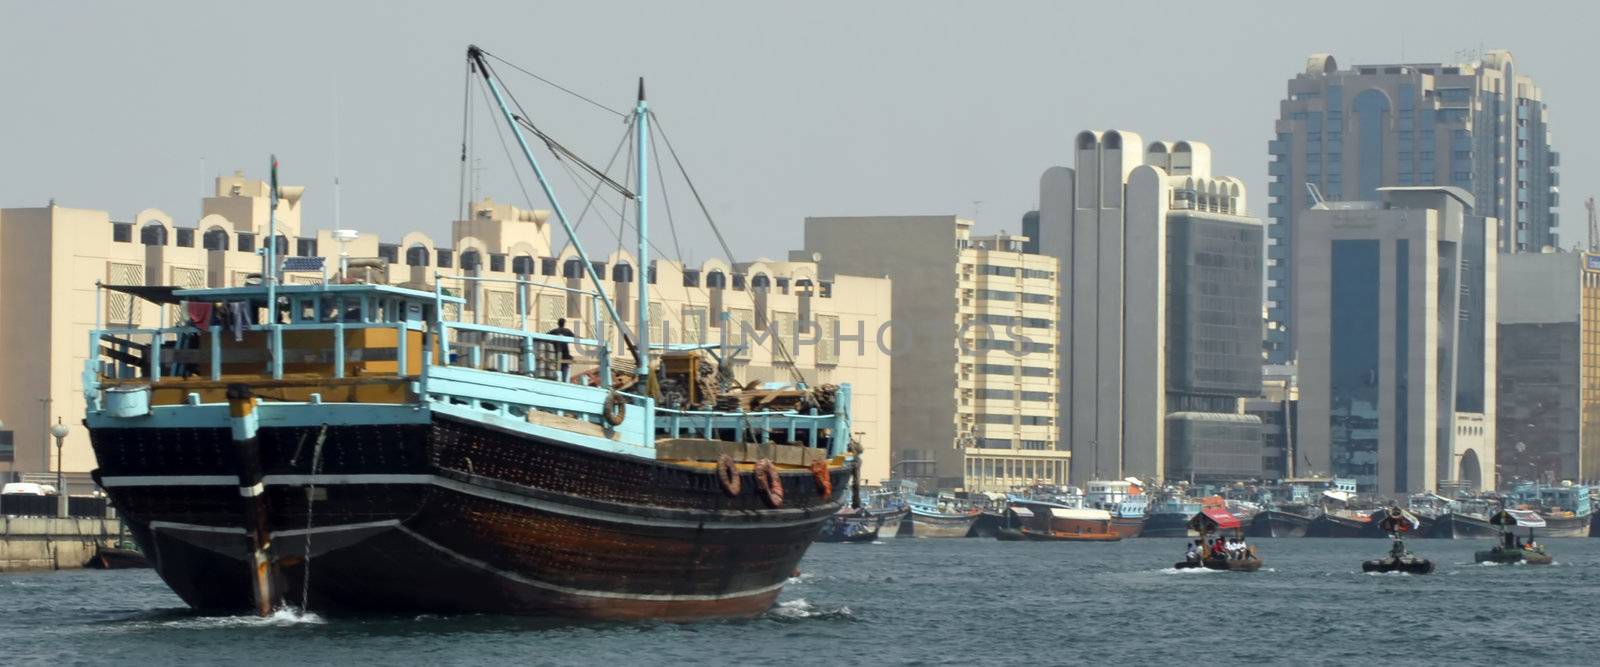 A dhow cruises the canals in Dubai